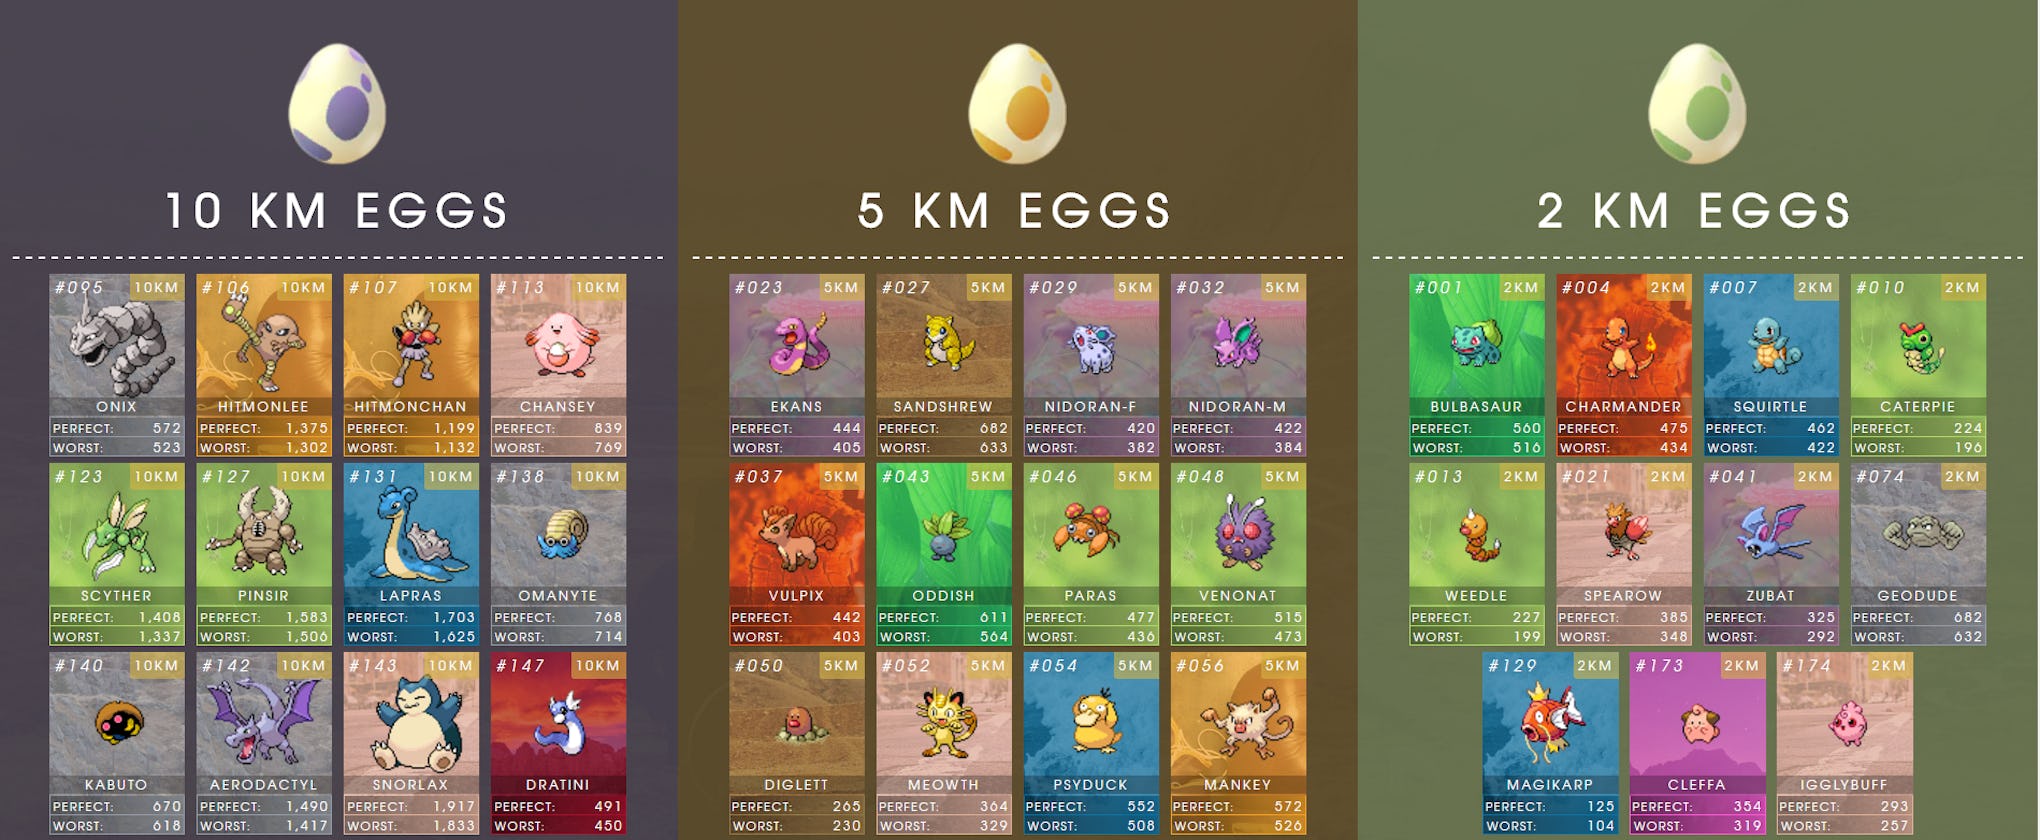 How to hatch eggs in 'Pokémon Go' and the chances of hatching a